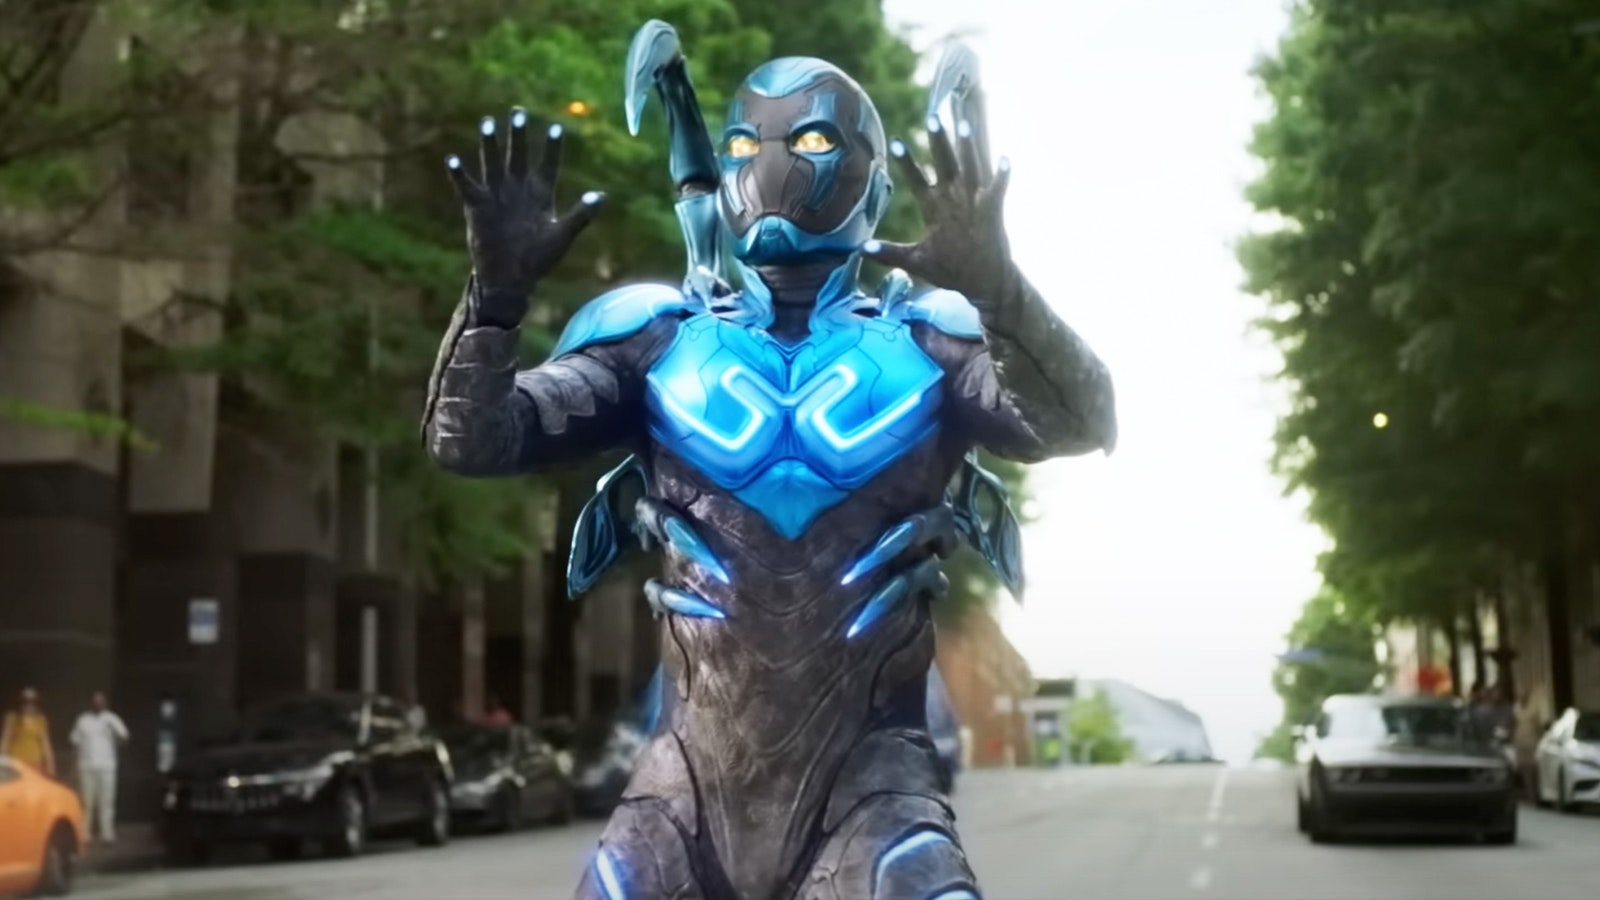 Blue Beetle Cast & Character Guide: Who Stars in the Movie?